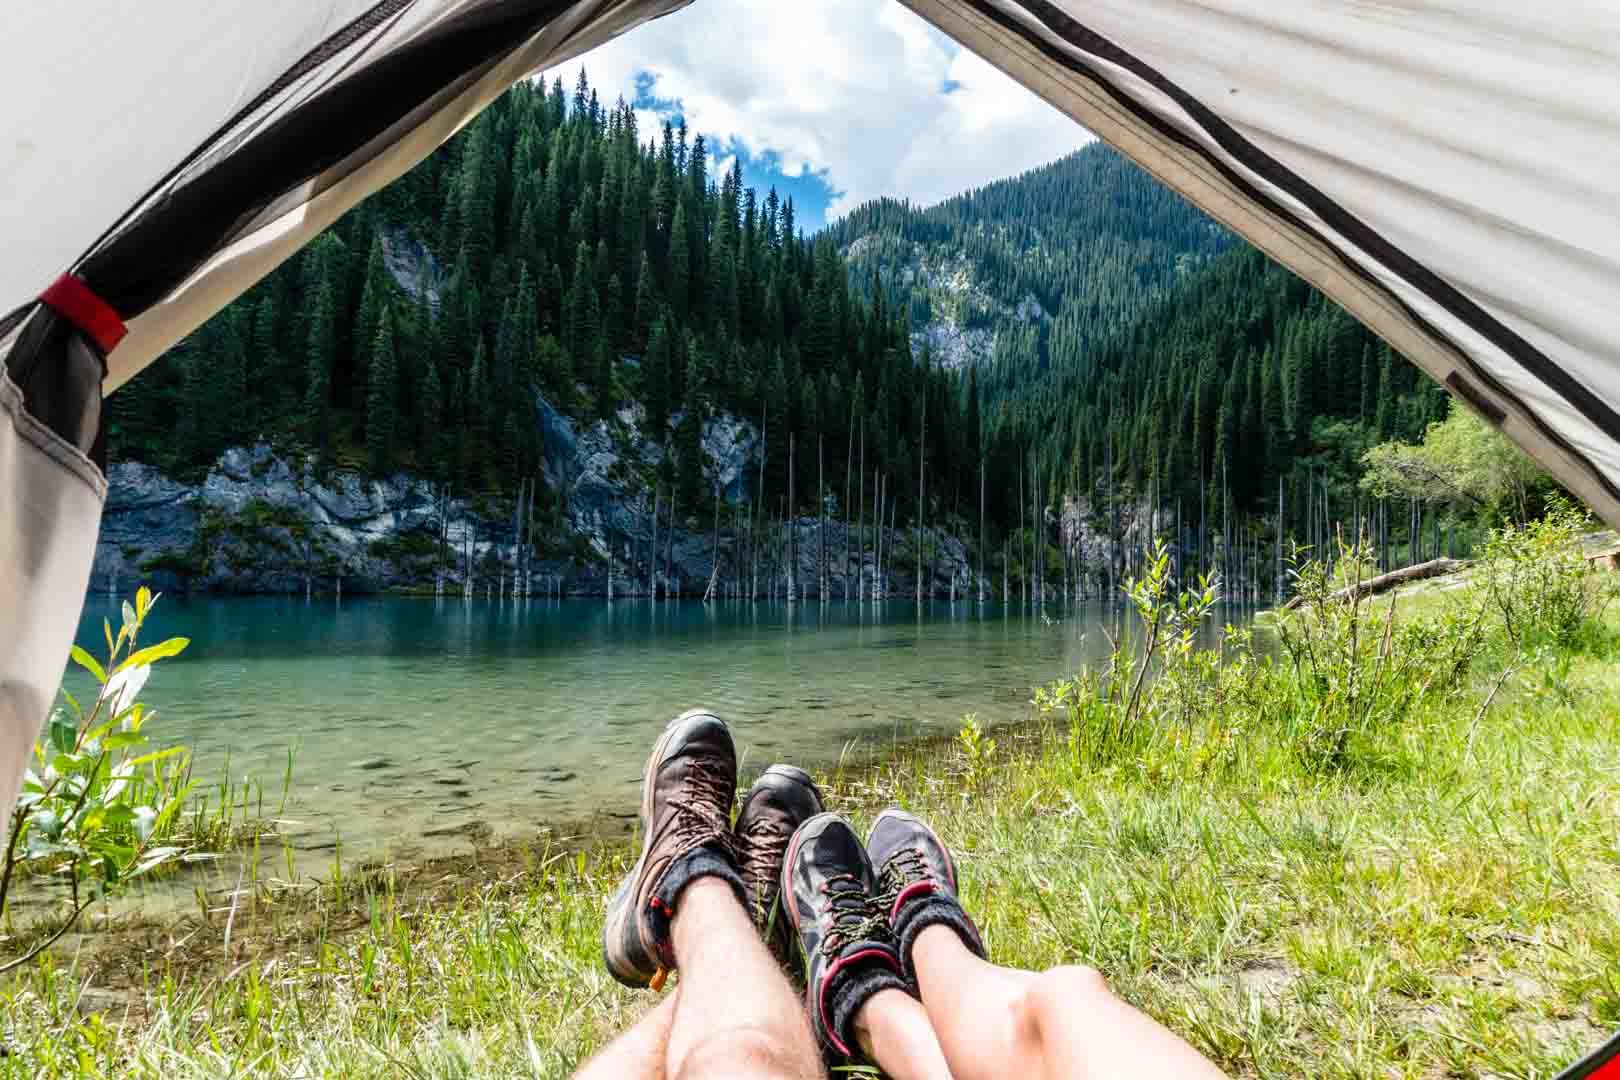 SerialHikers - Alternative Travel Blog SerialHikers - Engaged Travel & Without Flight Wild camping guide: our tips to camp safely during your journey! Alternative Travel Slow travel